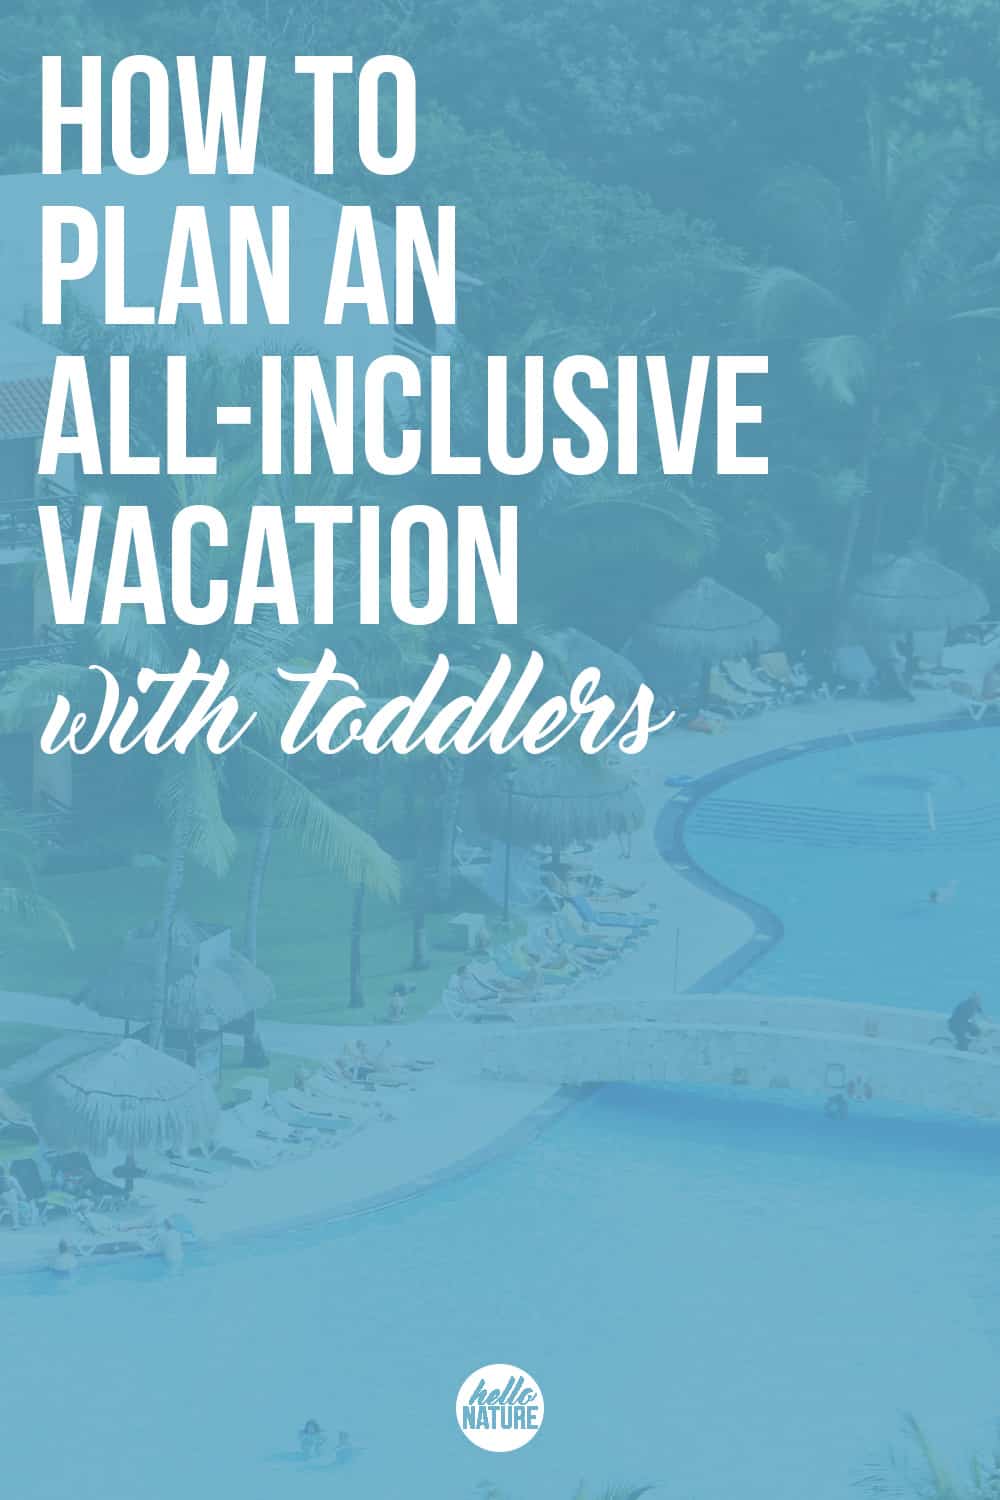 Planning a vacation for your family doesn't have to be hard. This guide gives you a simple plan of how to plan an all-inclusive vacation with toddlers.